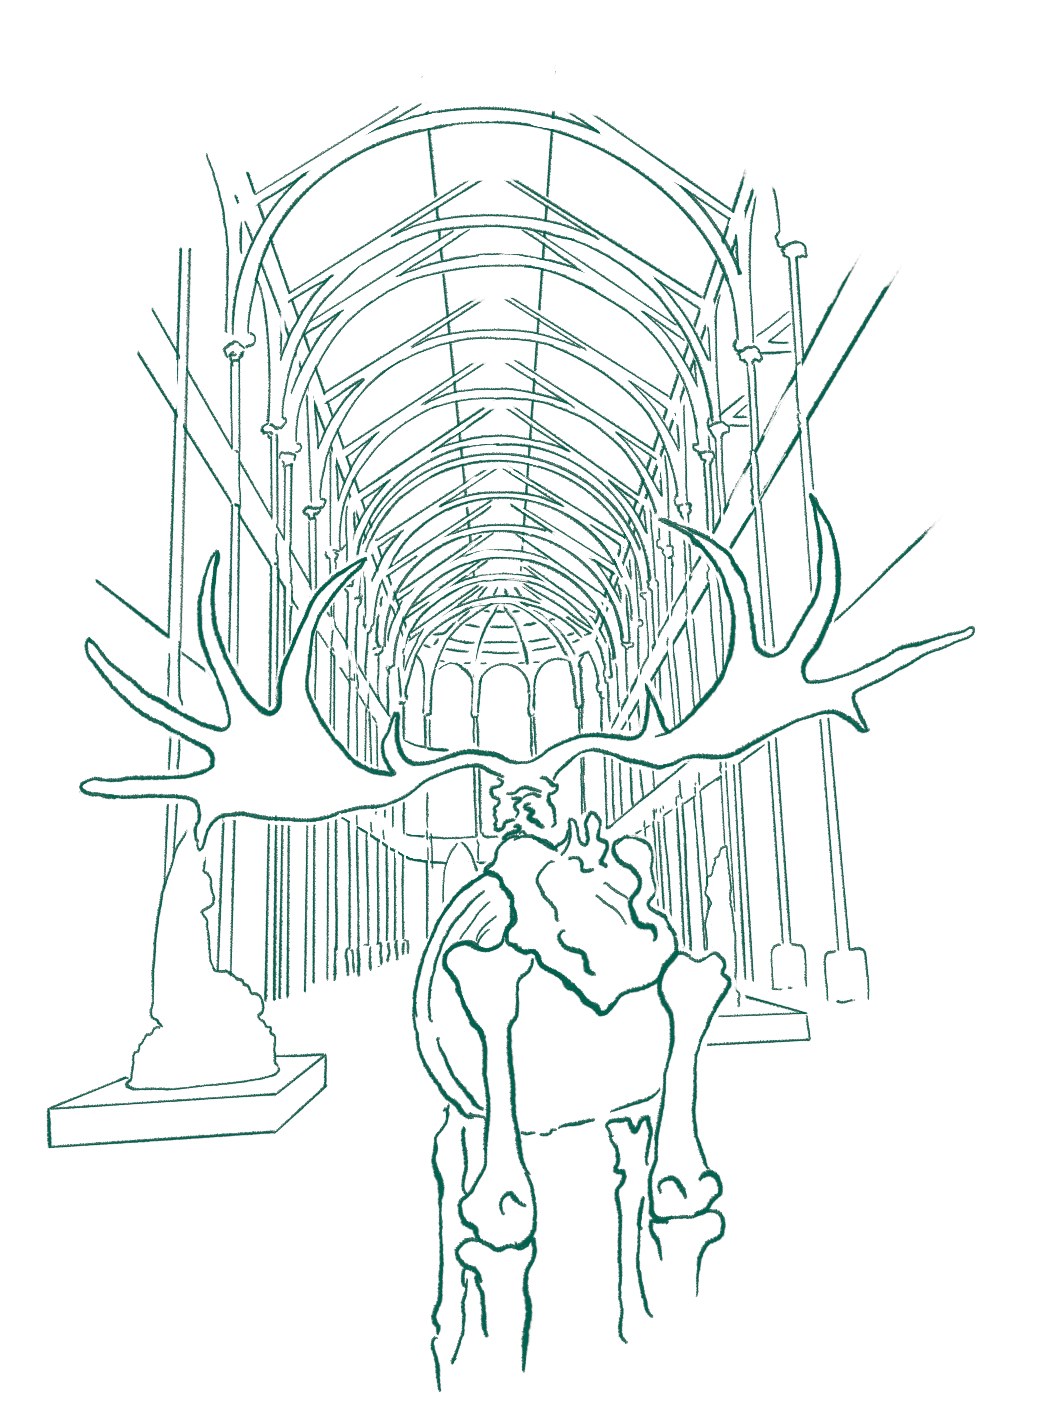 Link drawing of the skeleton of an Elk standing in a large museum gallery space